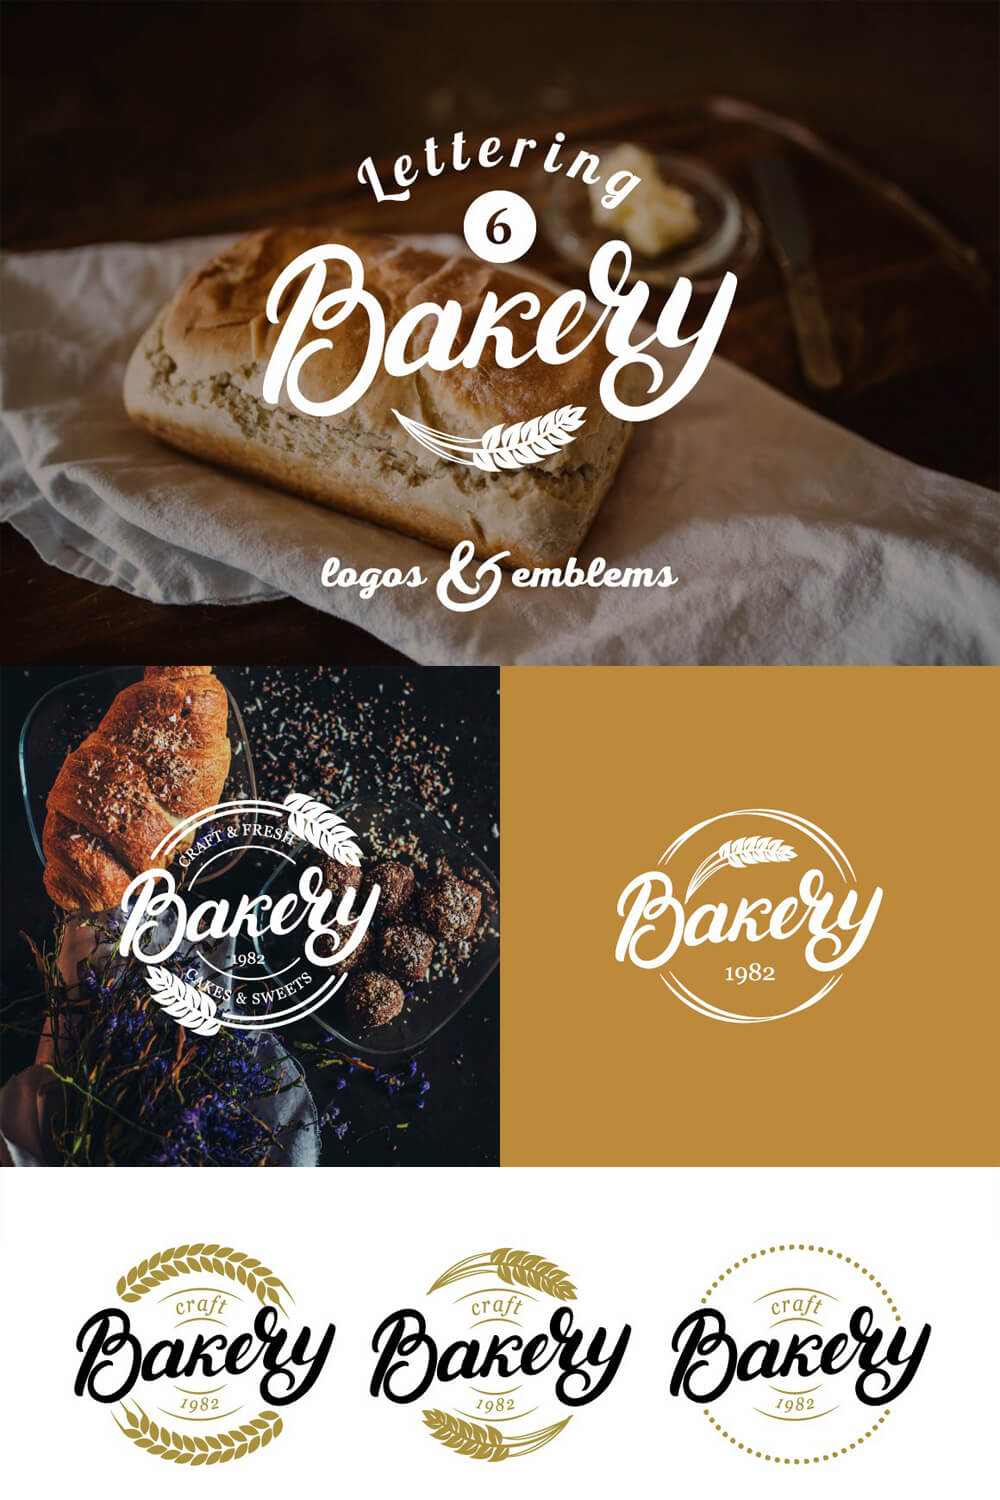 Several variants of the "Bakery" logos on backgrounds depicting pastries.